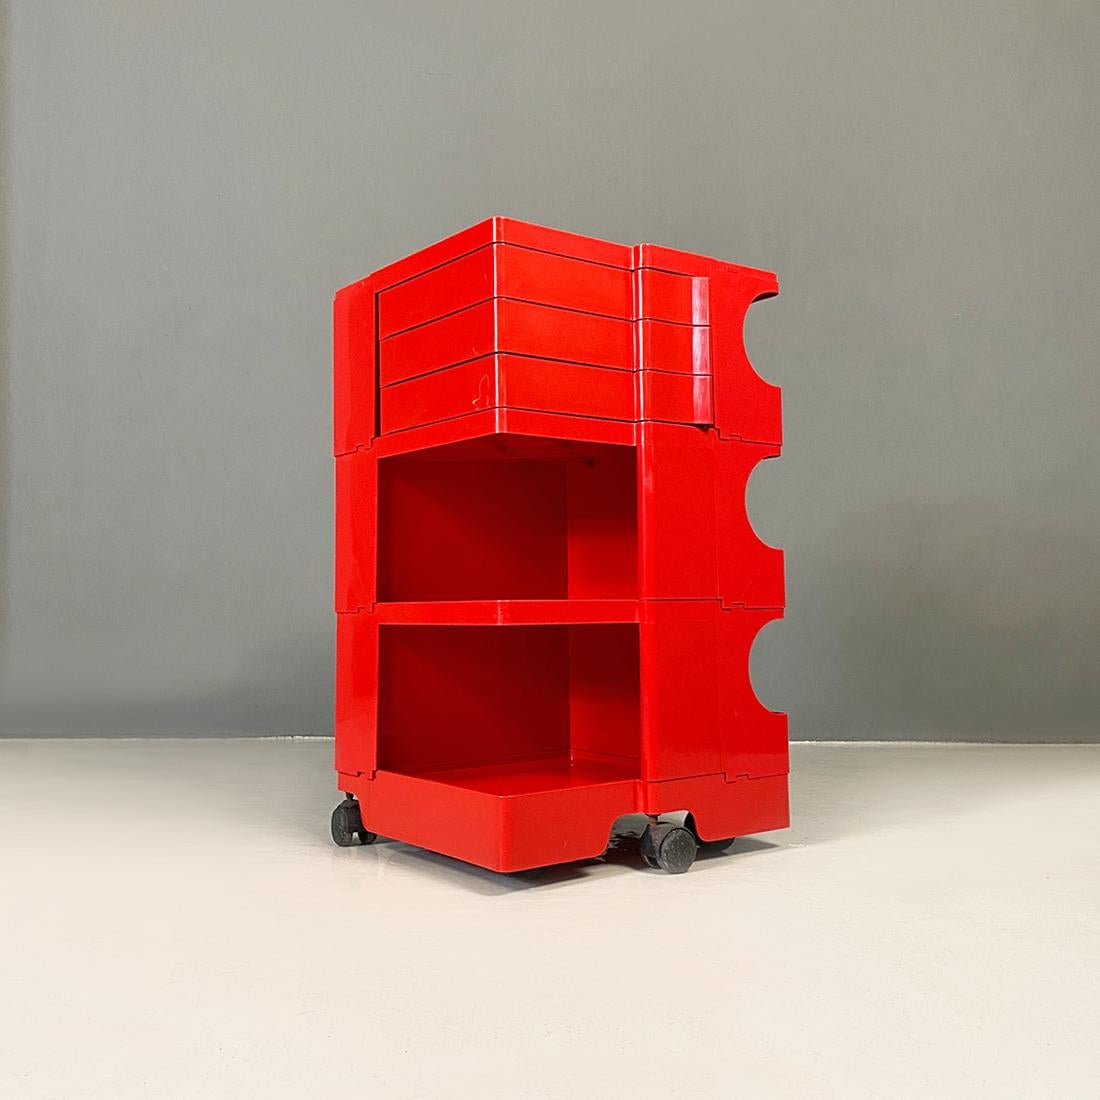 Italian modern red plastic storage trolley Boby, on wheels, by Joe Colombo for Bieffeplast in 1968.
Iconic and very useful in all environments, Boby model storage trolley with structure entirely in red plastic, on black wheels, equipped with